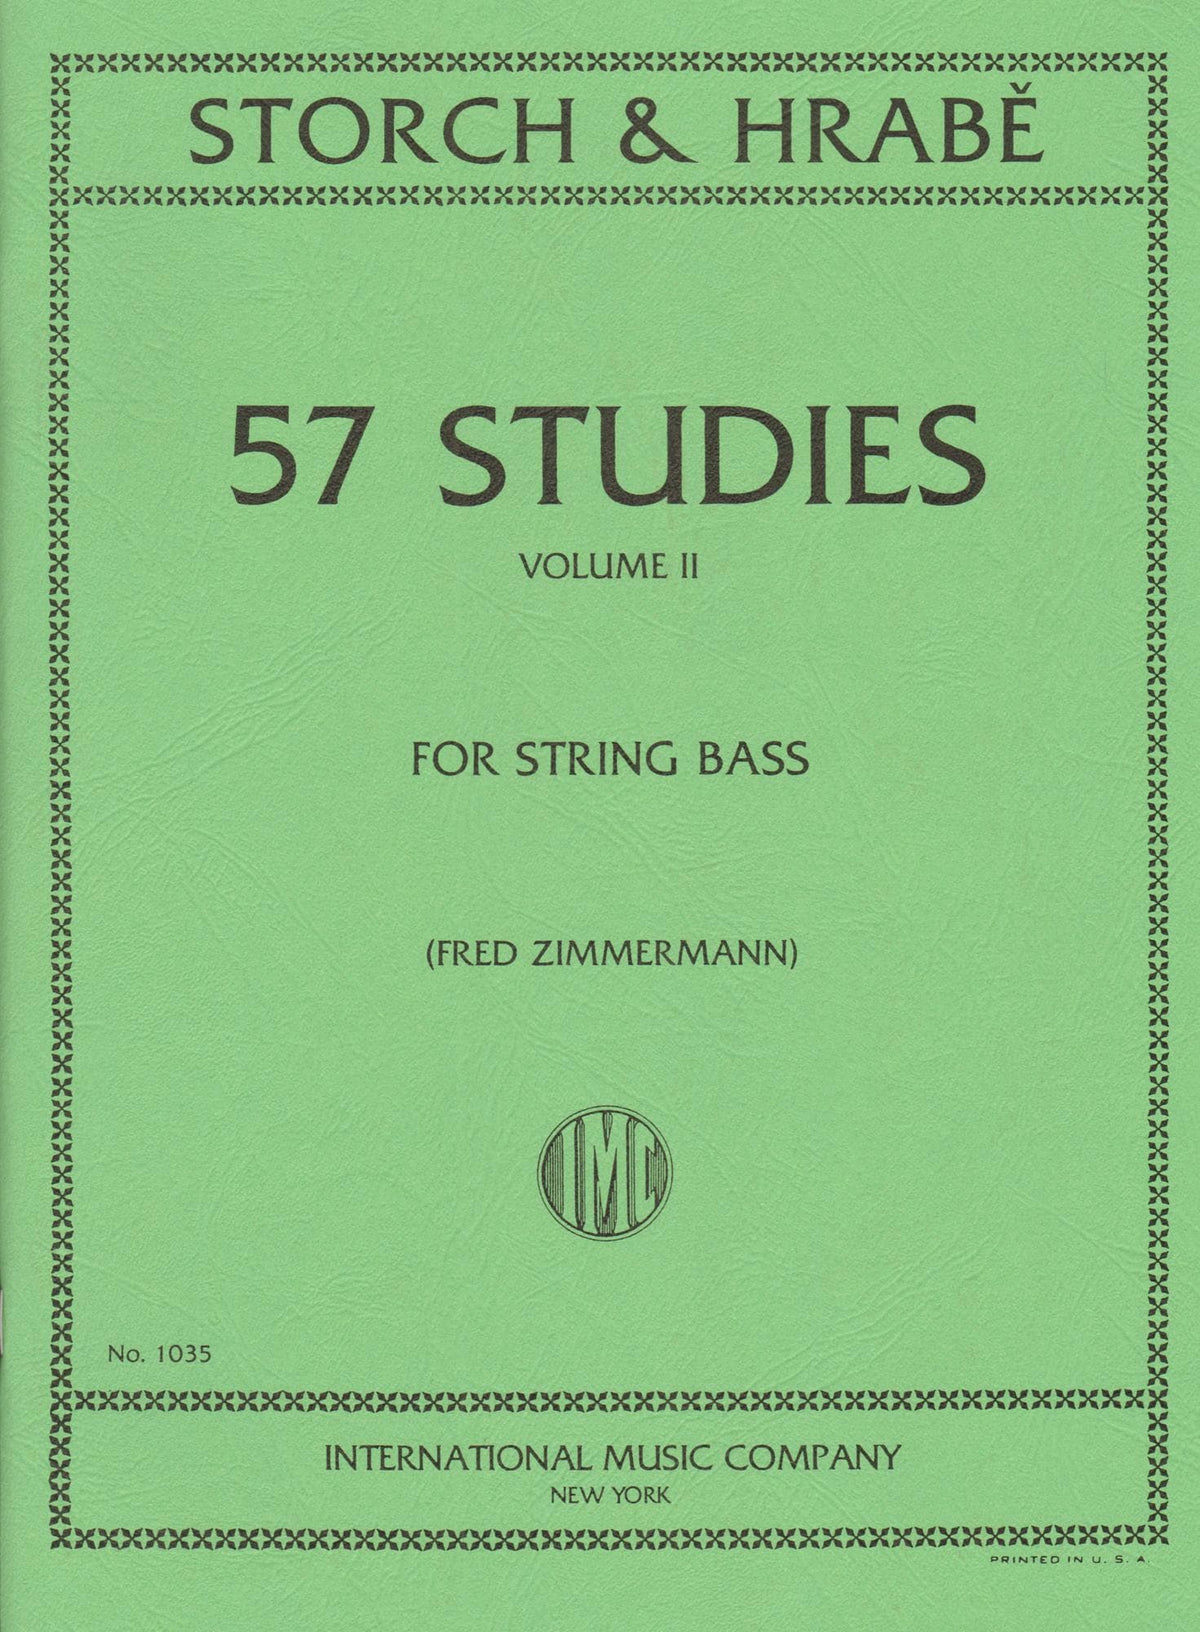 Storch/Hrabe - 57 Studies, Volume 2 For Bass Published by International Music Company